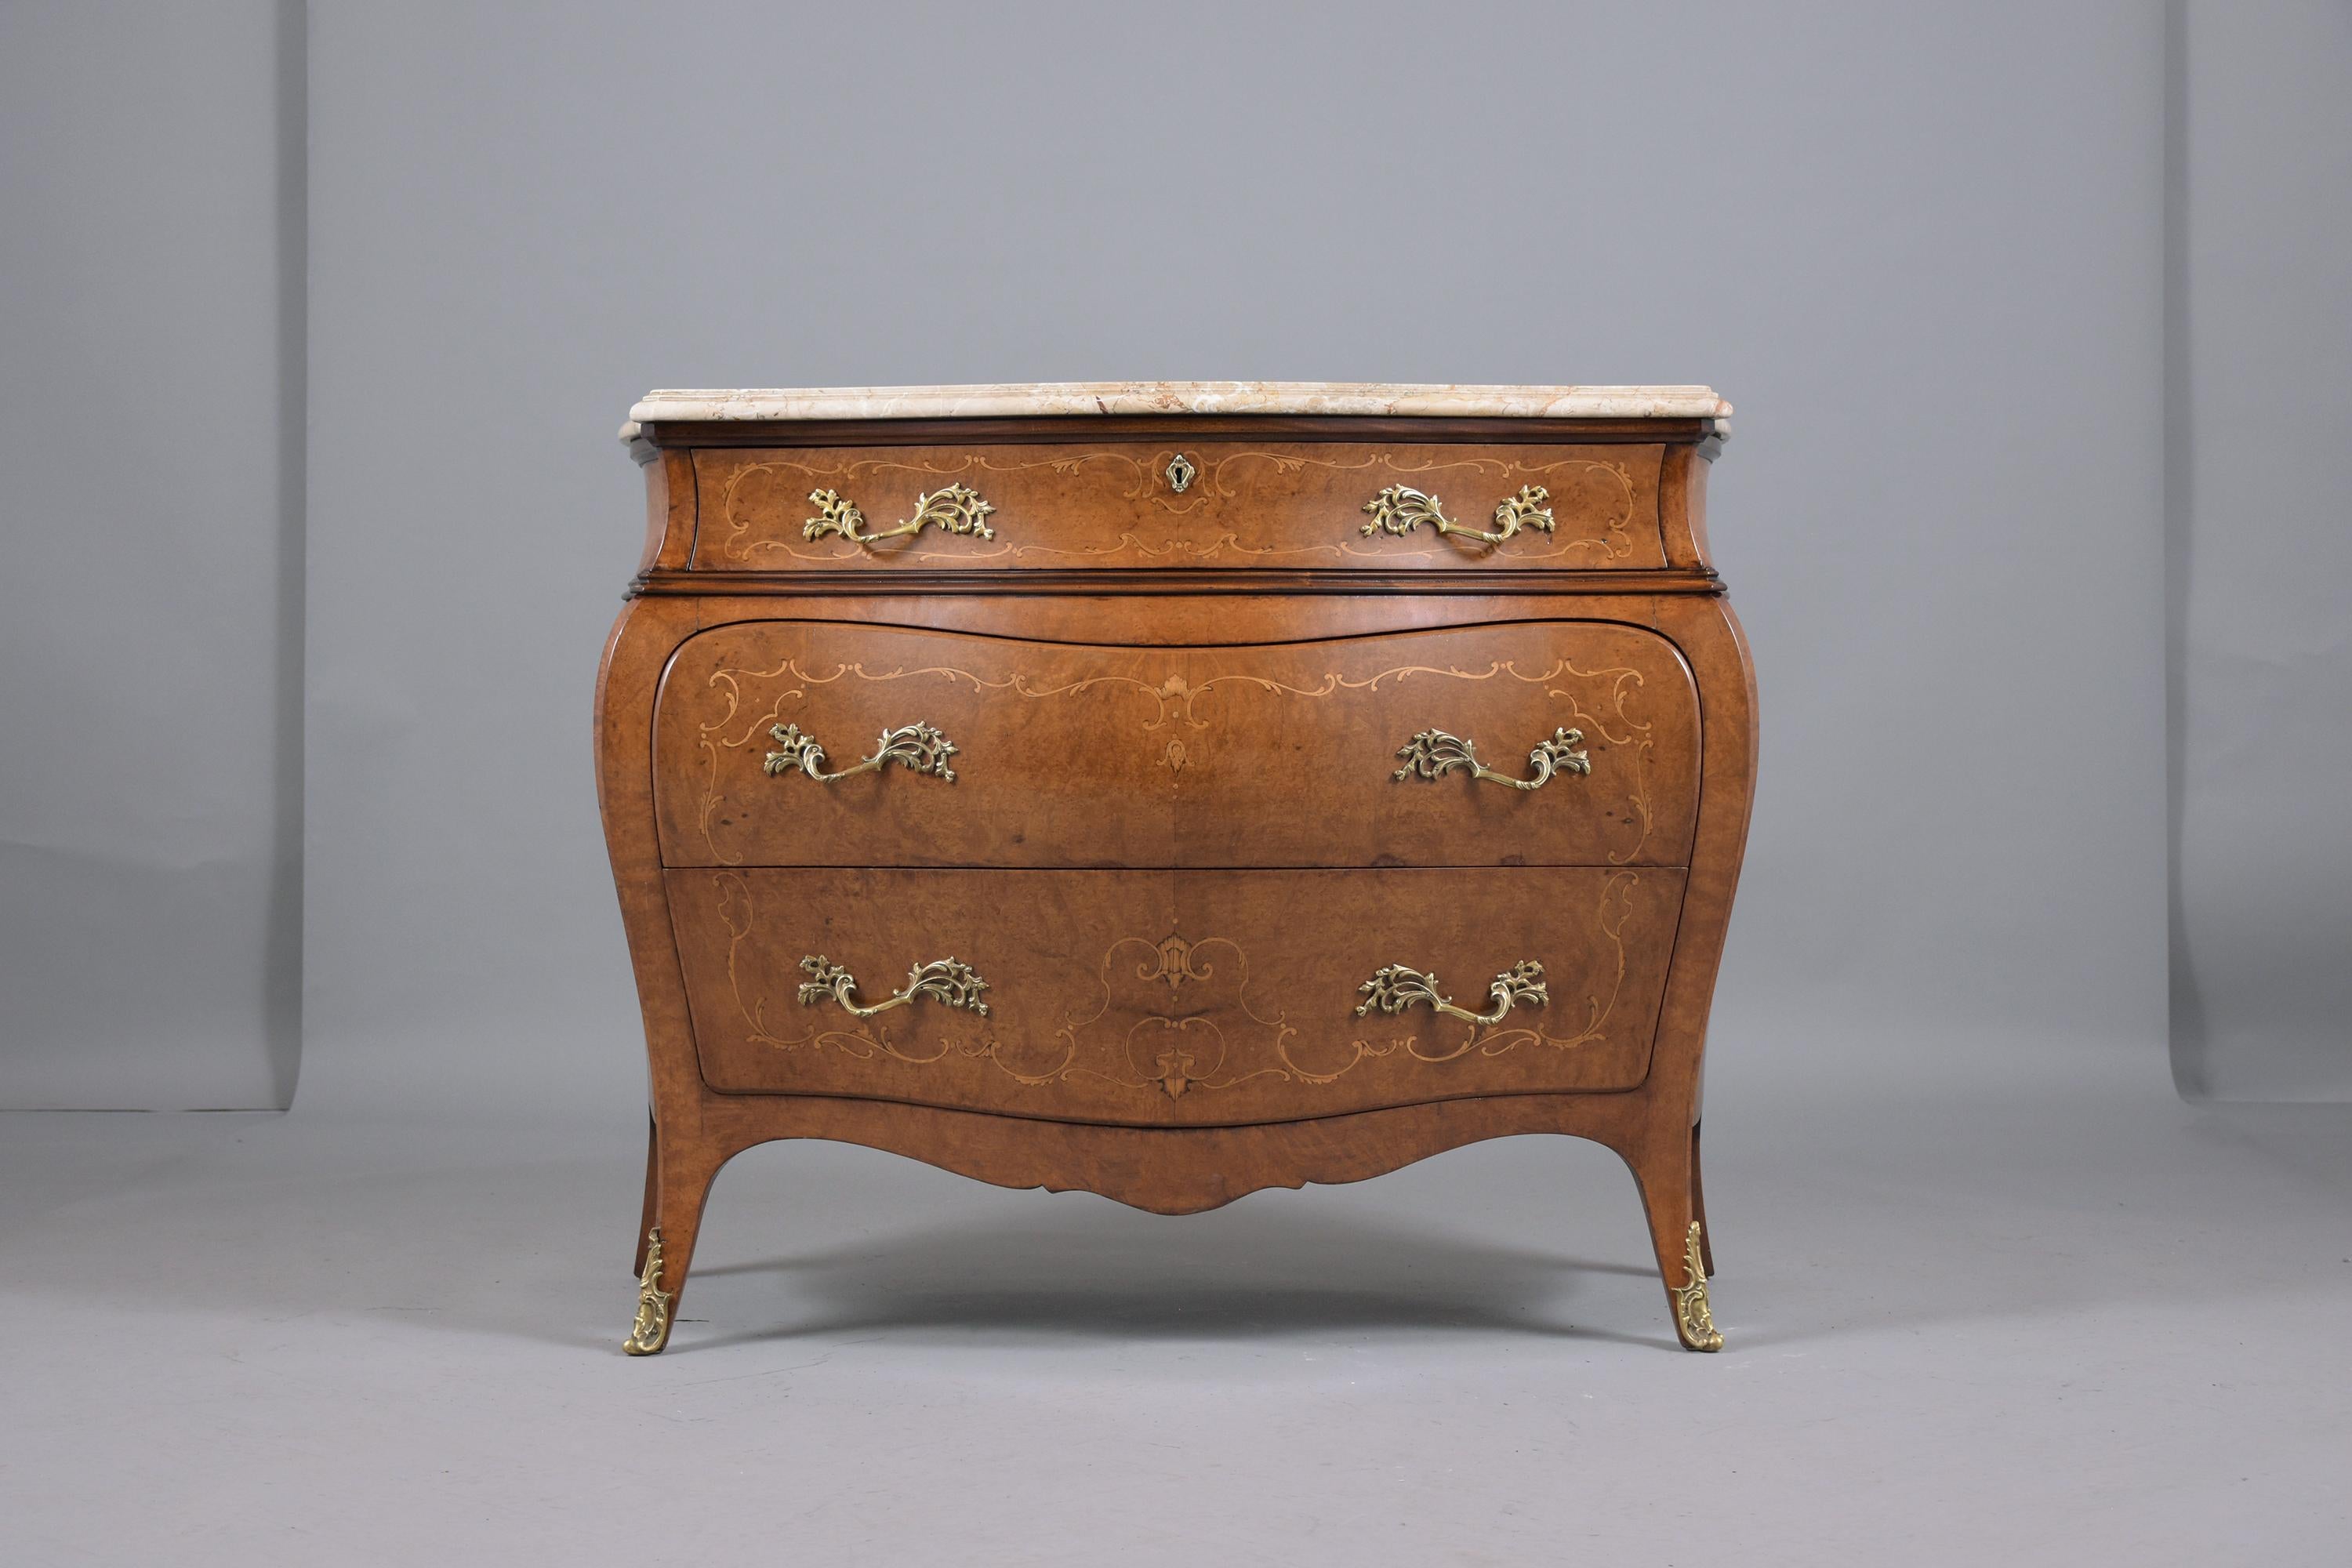 This excellent French 1910's chest of drawers is hand-crafted out of fruitwood professionally restored by our craftsmen team in the house. This serpentine style commode features a beige color bevel marble top, and elegant inlaid details throughout